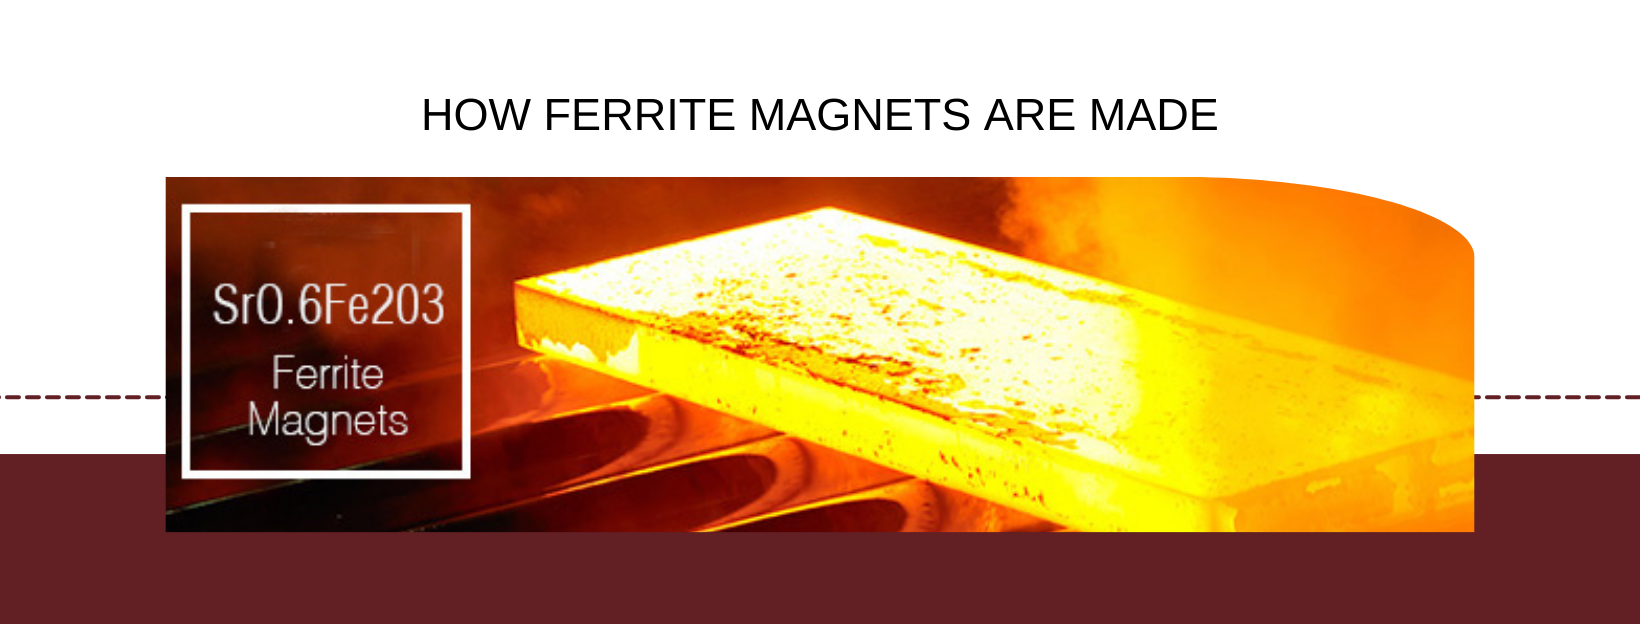 How Ferrite Magnets are made